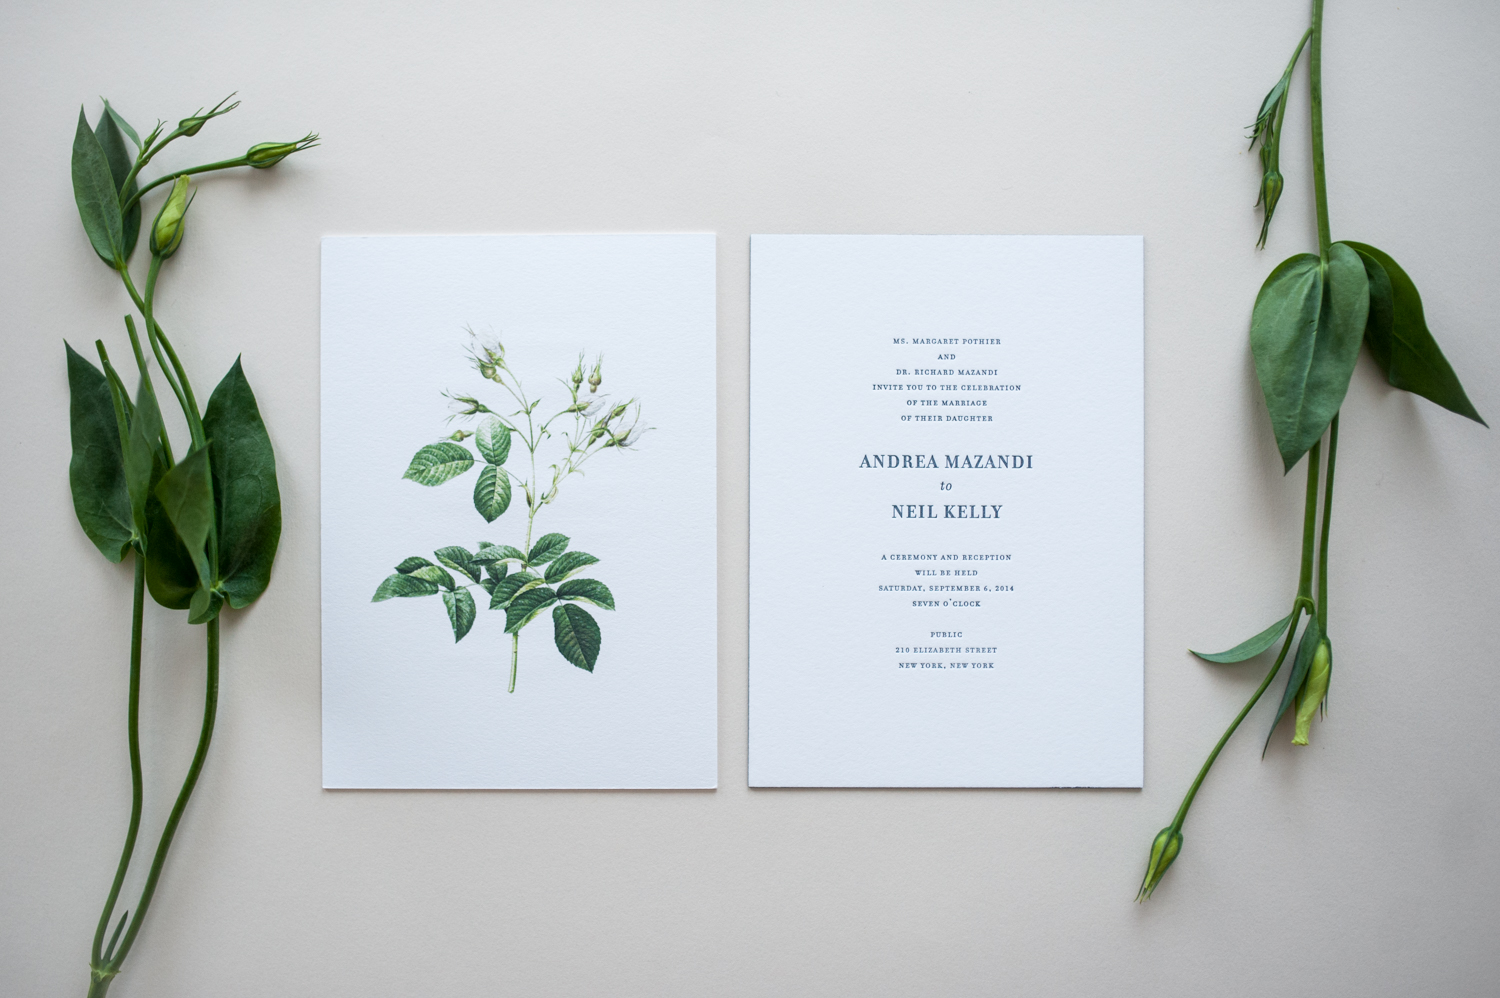 Andrea & Neil Wedding Invitation by Paper & Type, styling and photography by Emilie Anne Szabo